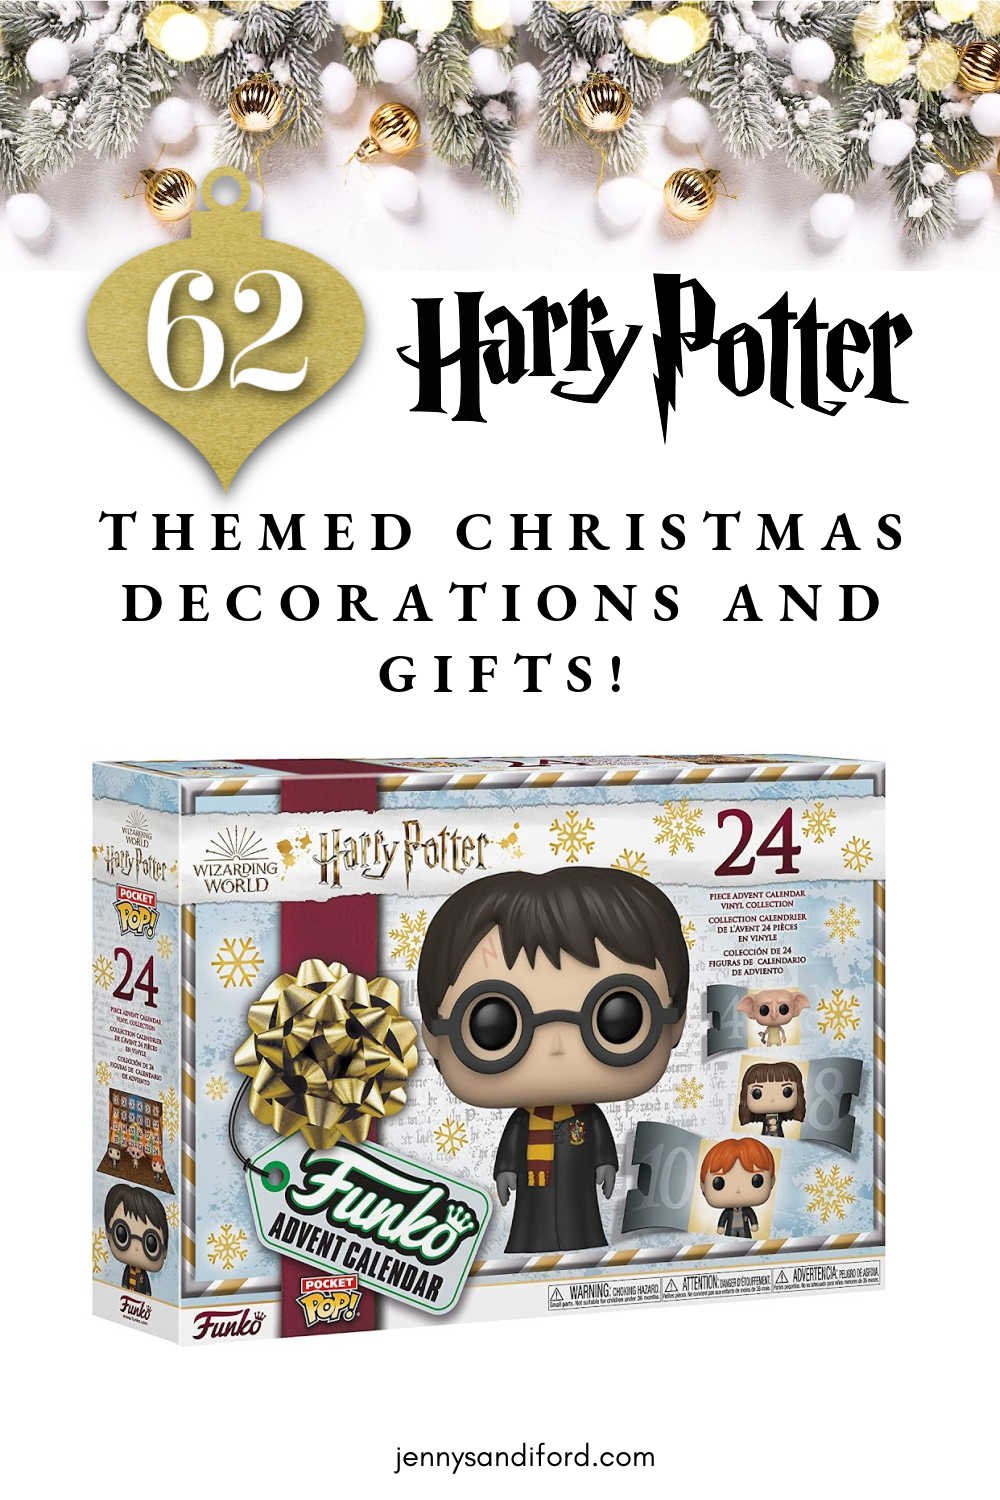 62 Harry Potter Christmas Decorations, Gifts, and More! — Jenny Sandiford